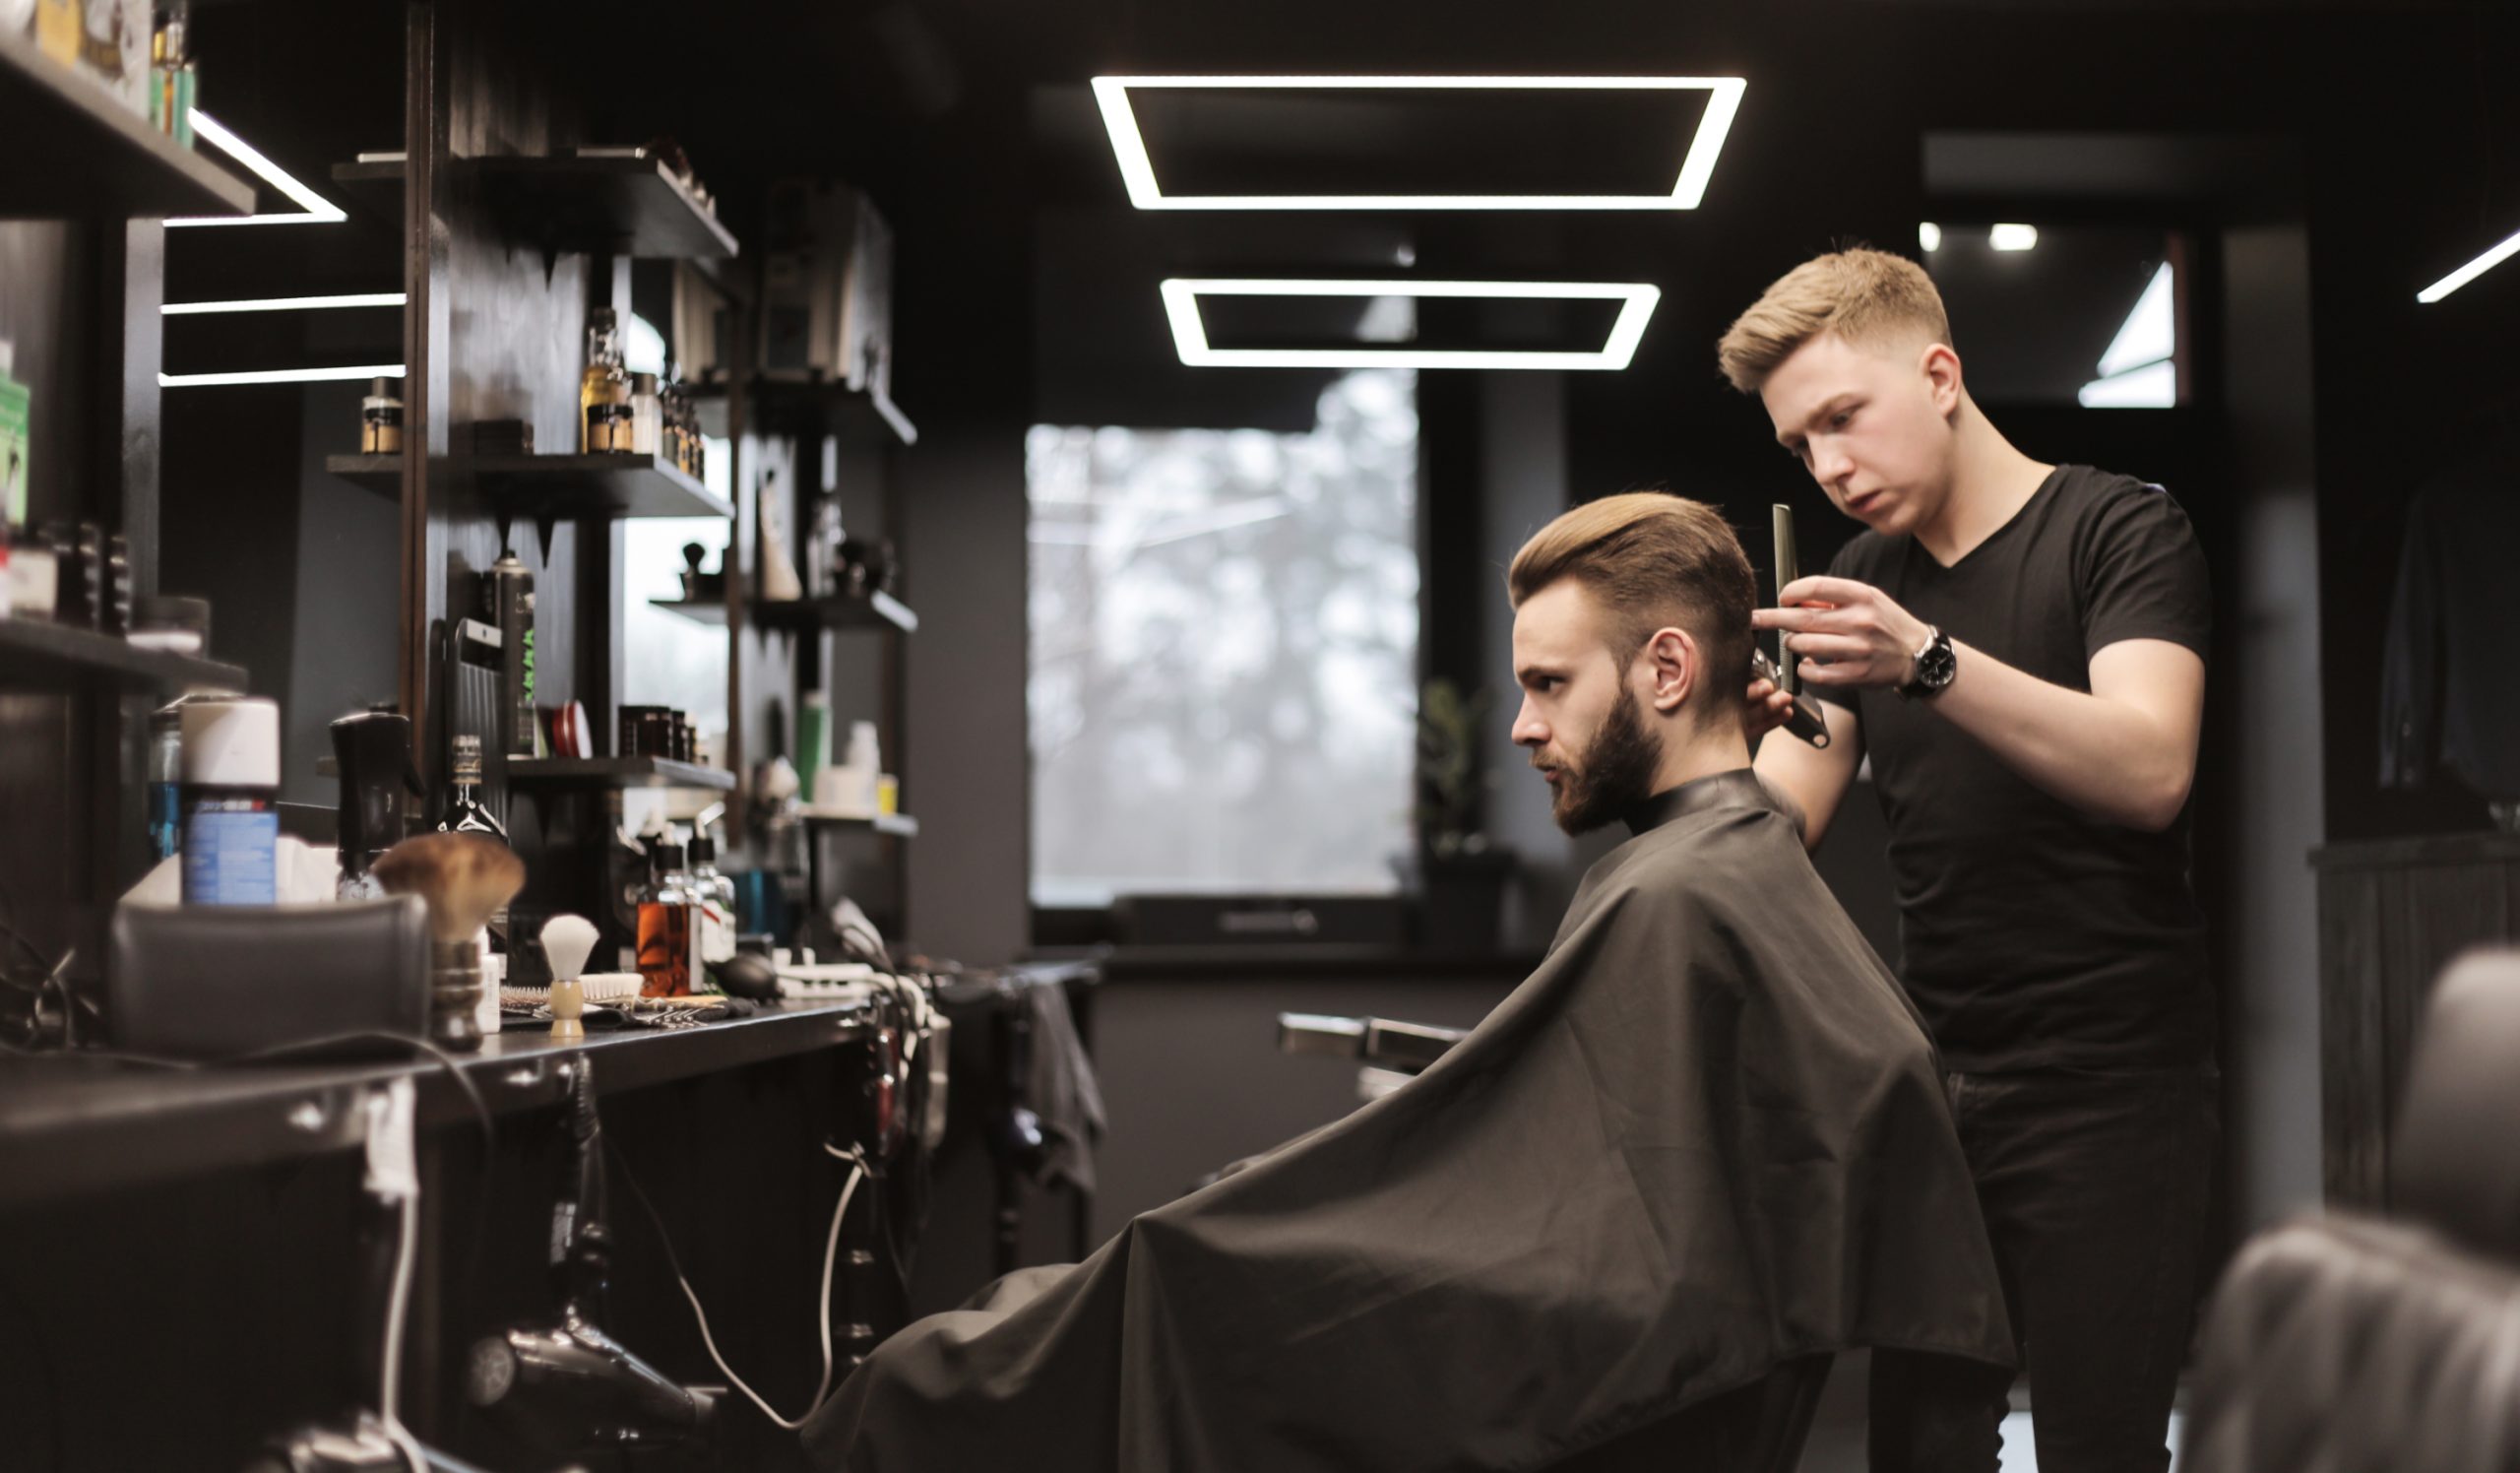 123Booking Friseursalon Hannover scaled